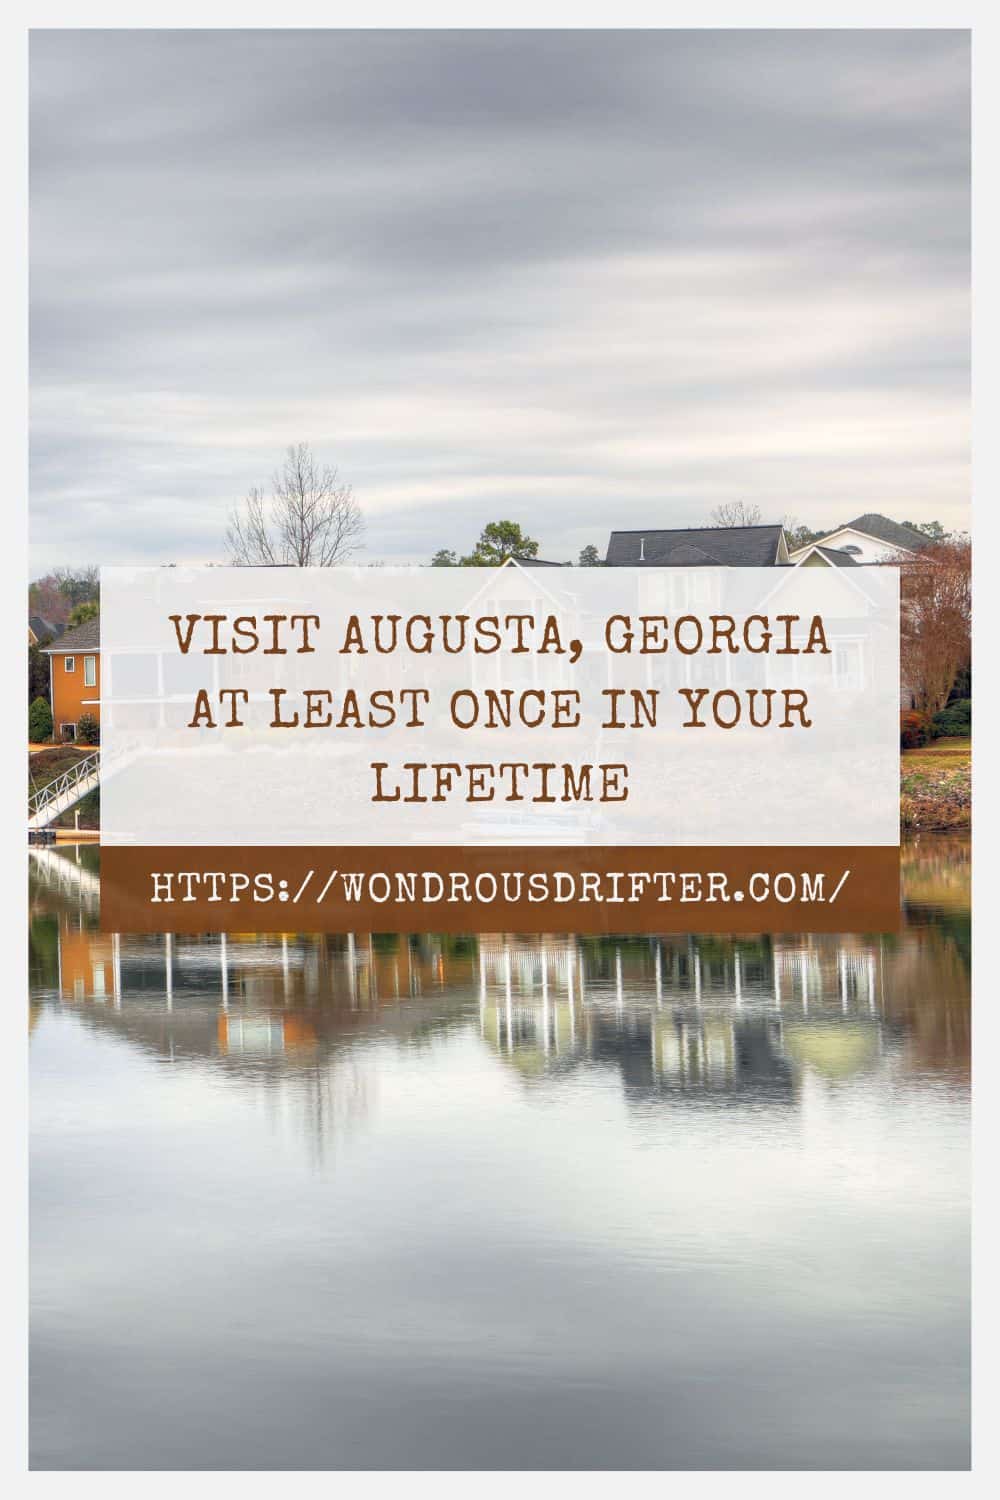 Visit Augusta Georgia at least once in your lifetime